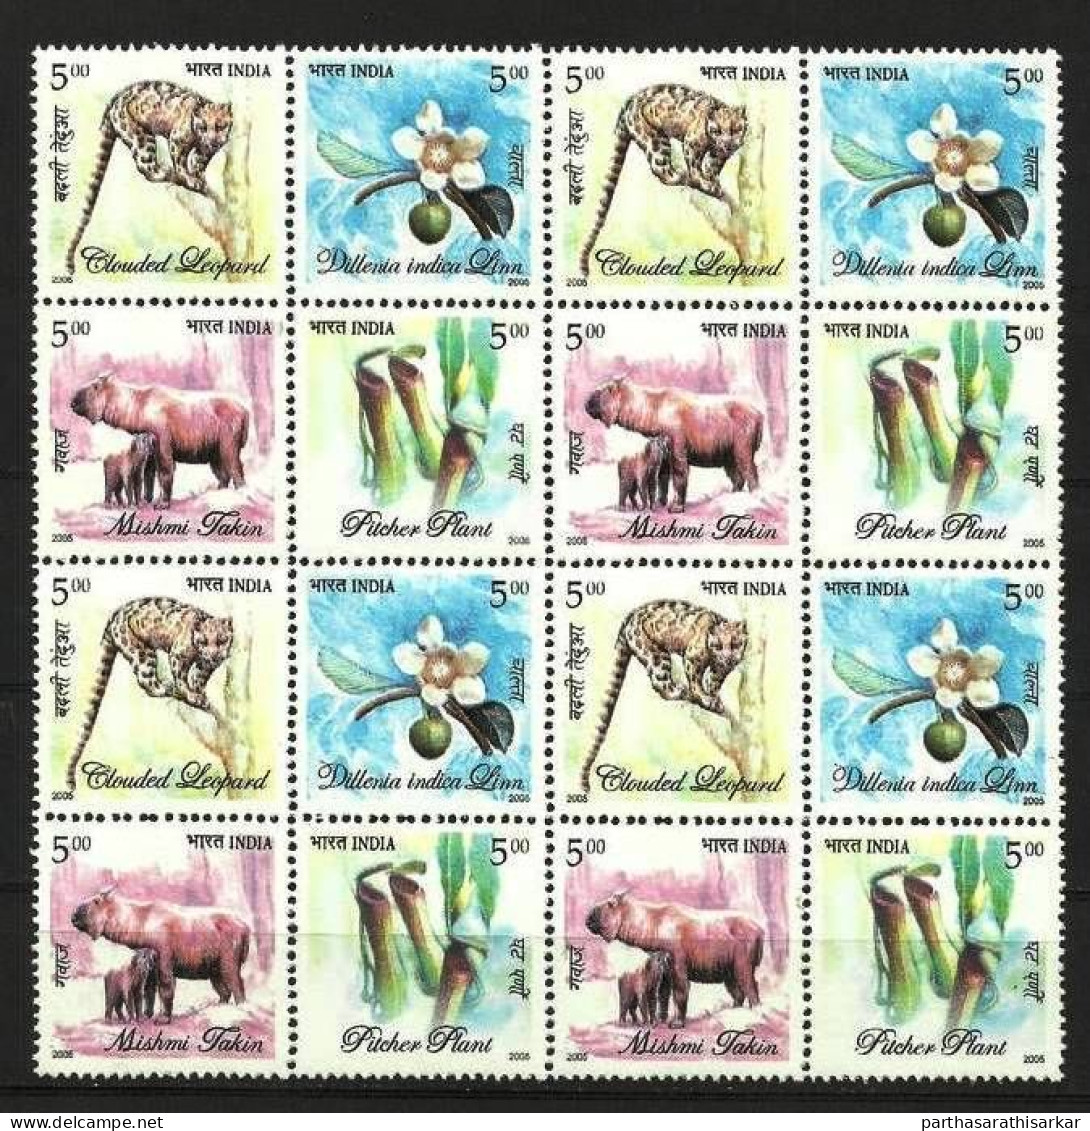 INDIA 2005 FLORA AND FAUNA OF NORTH EAST INDIA COMPLETE SE-TANENT BLOCK OF 4 MNH RARE - Neufs